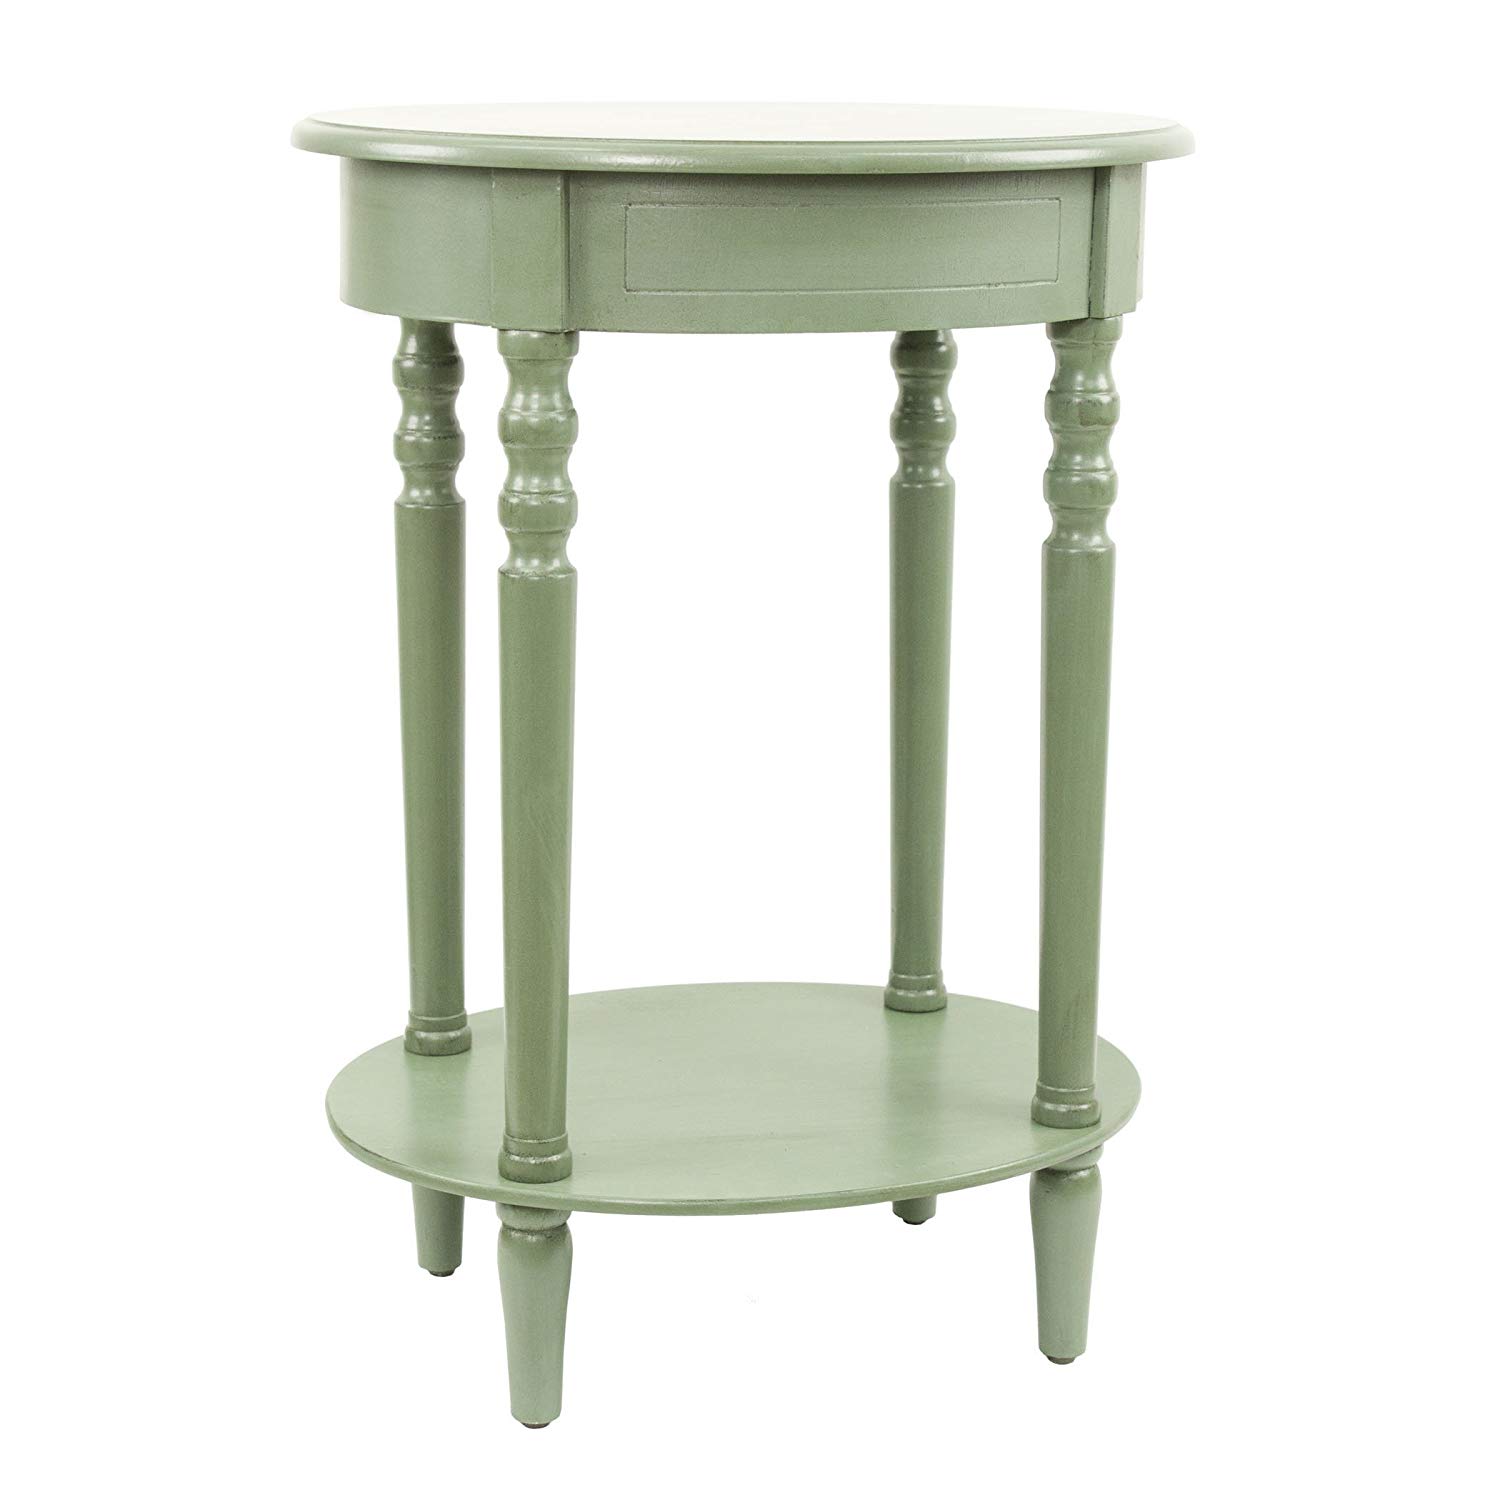 decor therapy simplify oval accent table antique green kitchen dining small with lamp attached cement top farmhouse set mid century modern bedside tables cabinet drawers vintage